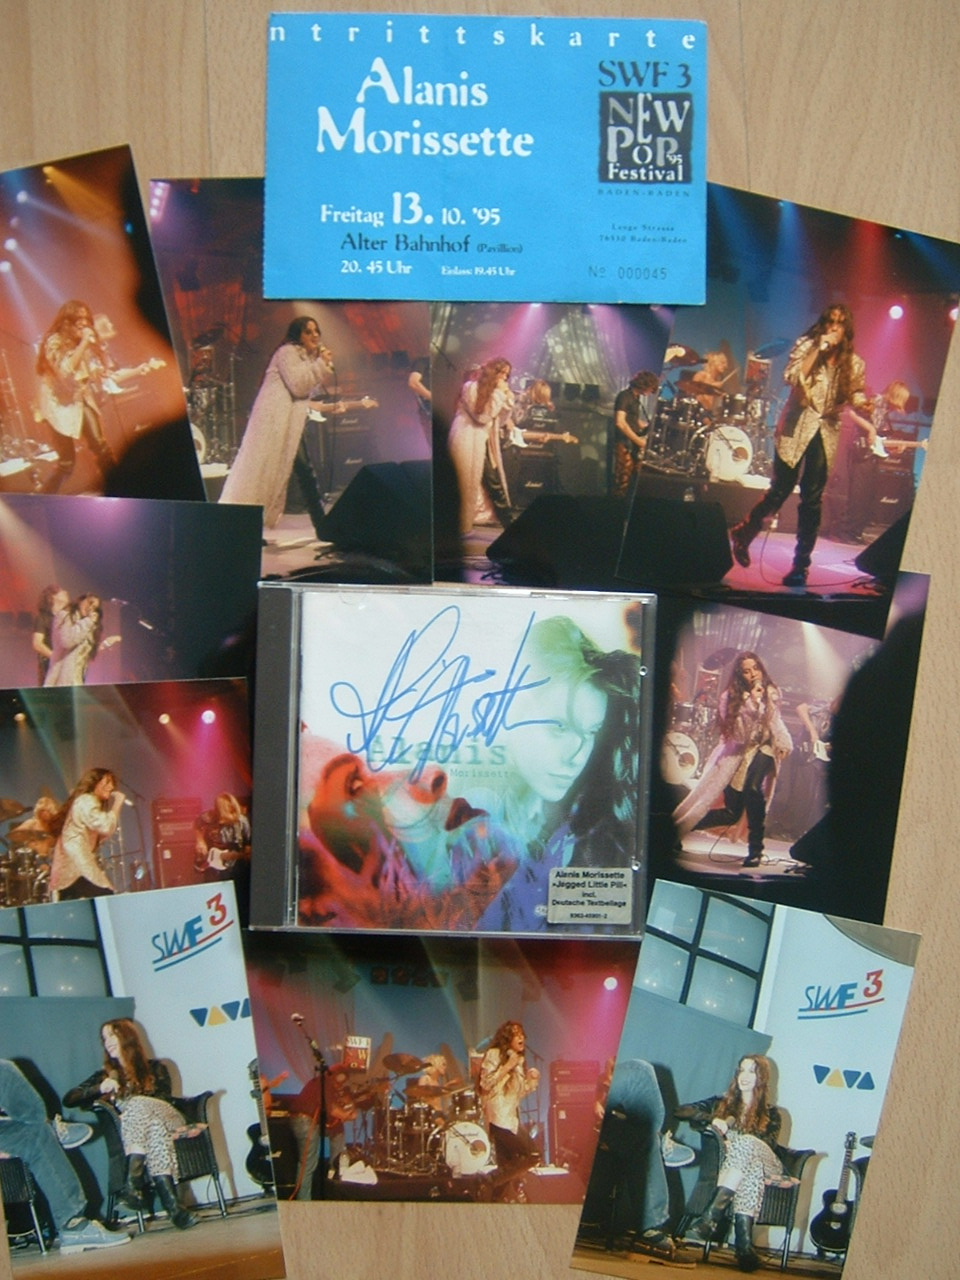 signed jagged little pill album and some of my live photos